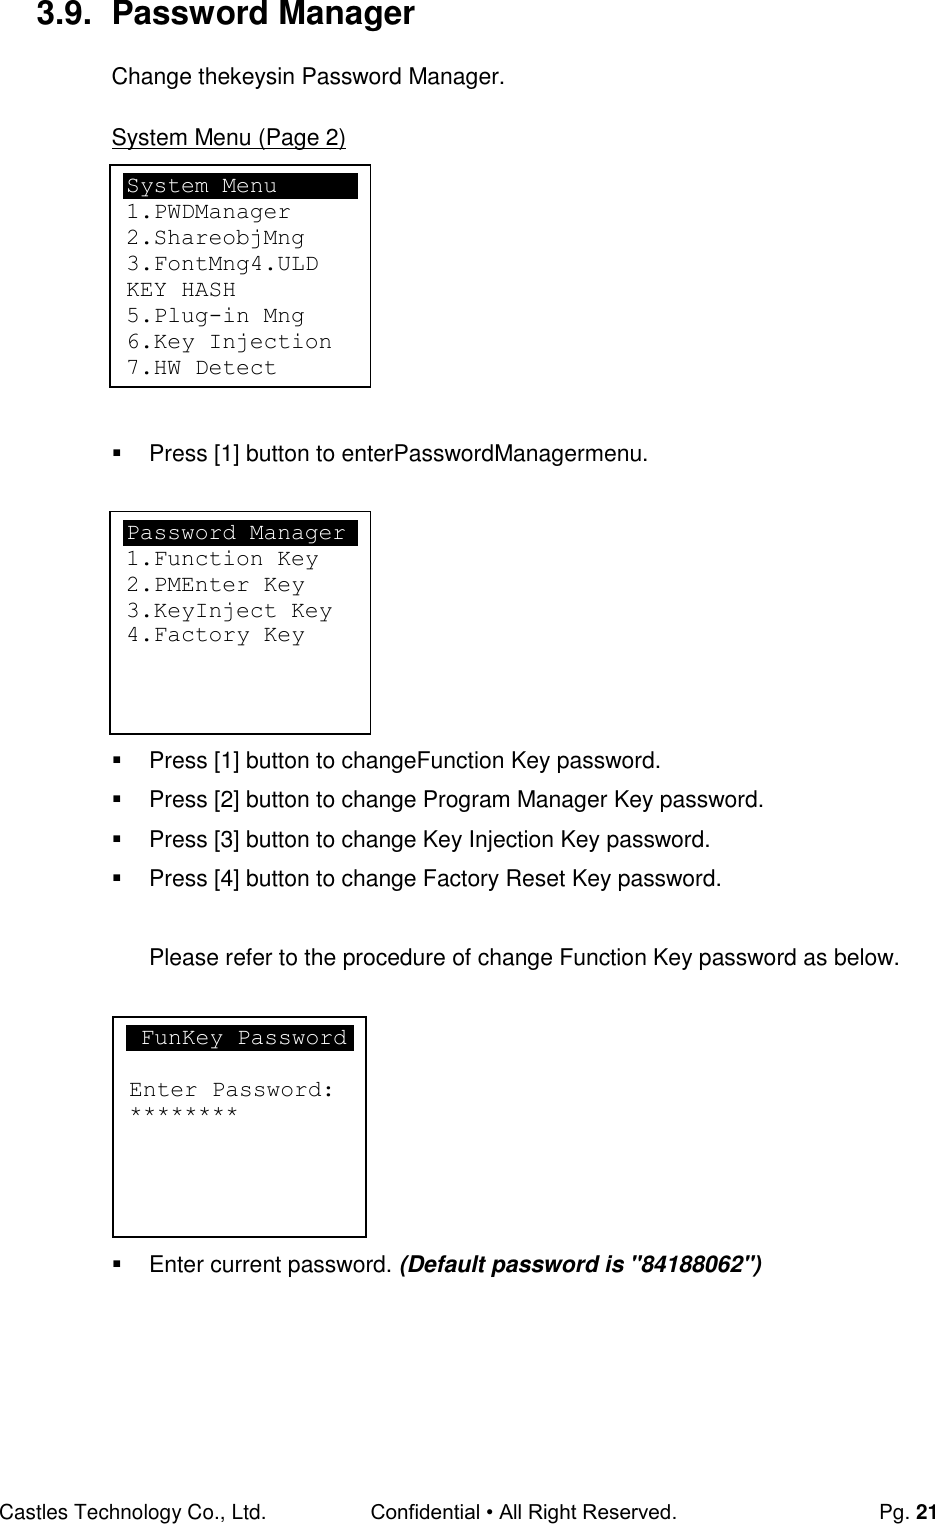 Castles Technology Co., Ltd. Confidential • All Right Reserved.  Pg. 21 3.9.  Password Manager Change thekeysin Password Manager.  System Menu (Page 2)          Press [1] button to enterPasswordManagermenu.          Press [1] button to changeFunction Key password.   Press [2] button to change Program Manager Key password.   Press [3] button to change Key Injection Key password.   Press [4] button to change Factory Reset Key password.  Please refer to the procedure of change Function Key password as below.          Enter current password. (Default password is &quot;84188062&quot;)     FunKey Password  Enter Password: ******** System Menu 1.PWDManager 2.ShareobjMng 3.FontMng4.ULD KEY HASH 5.Plug-in Mng 6.Key Injection 7.HW Detect  Password Manager 1.Function Key 2.PMEnter Key 3.KeyInject Key  4.Factory Key 